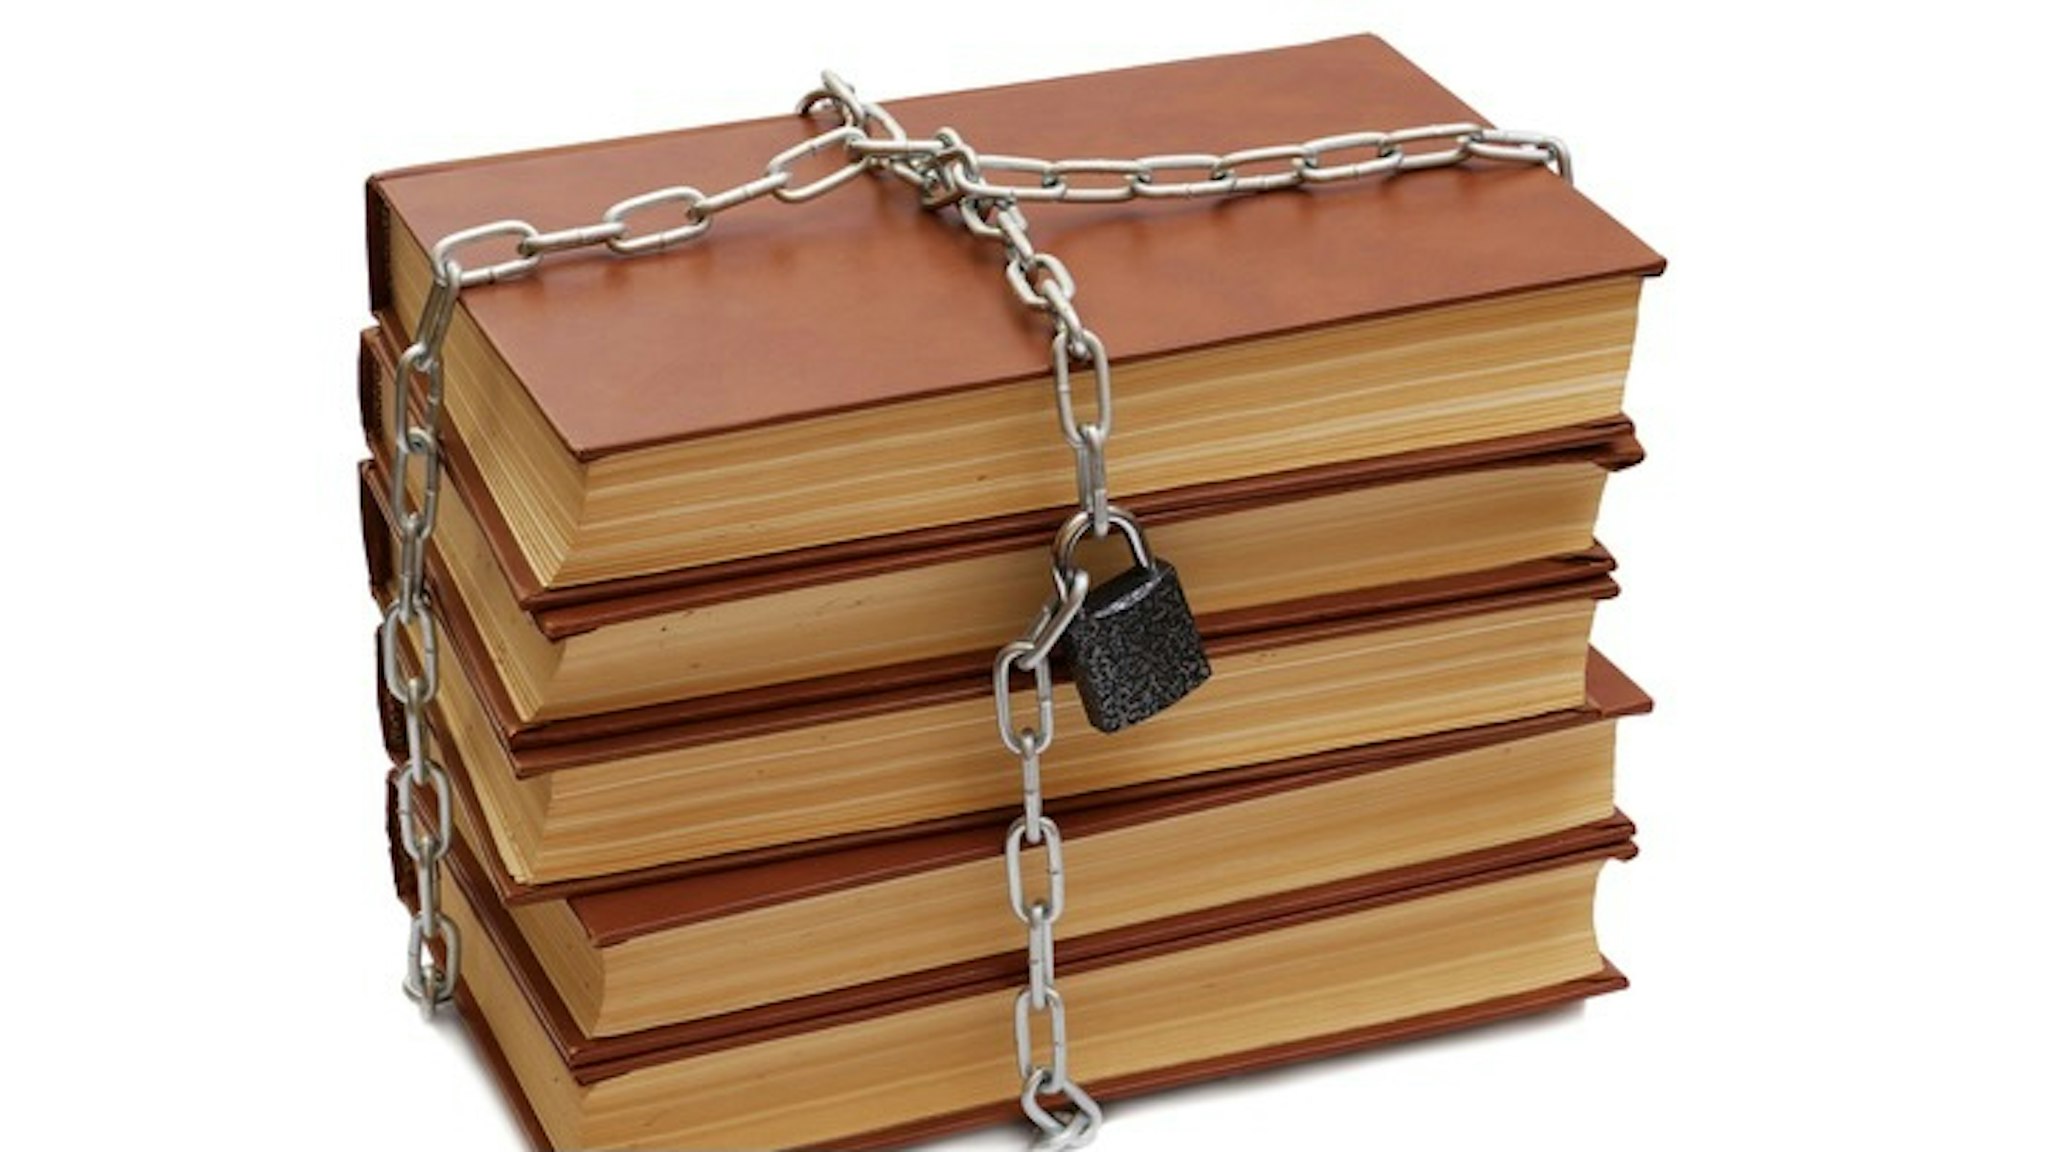 stack of books wrapped by chain with padlock isolated on white background - stock photo stack of books wrapped by chain with padlock isolated on white background asadykov via Getty Images